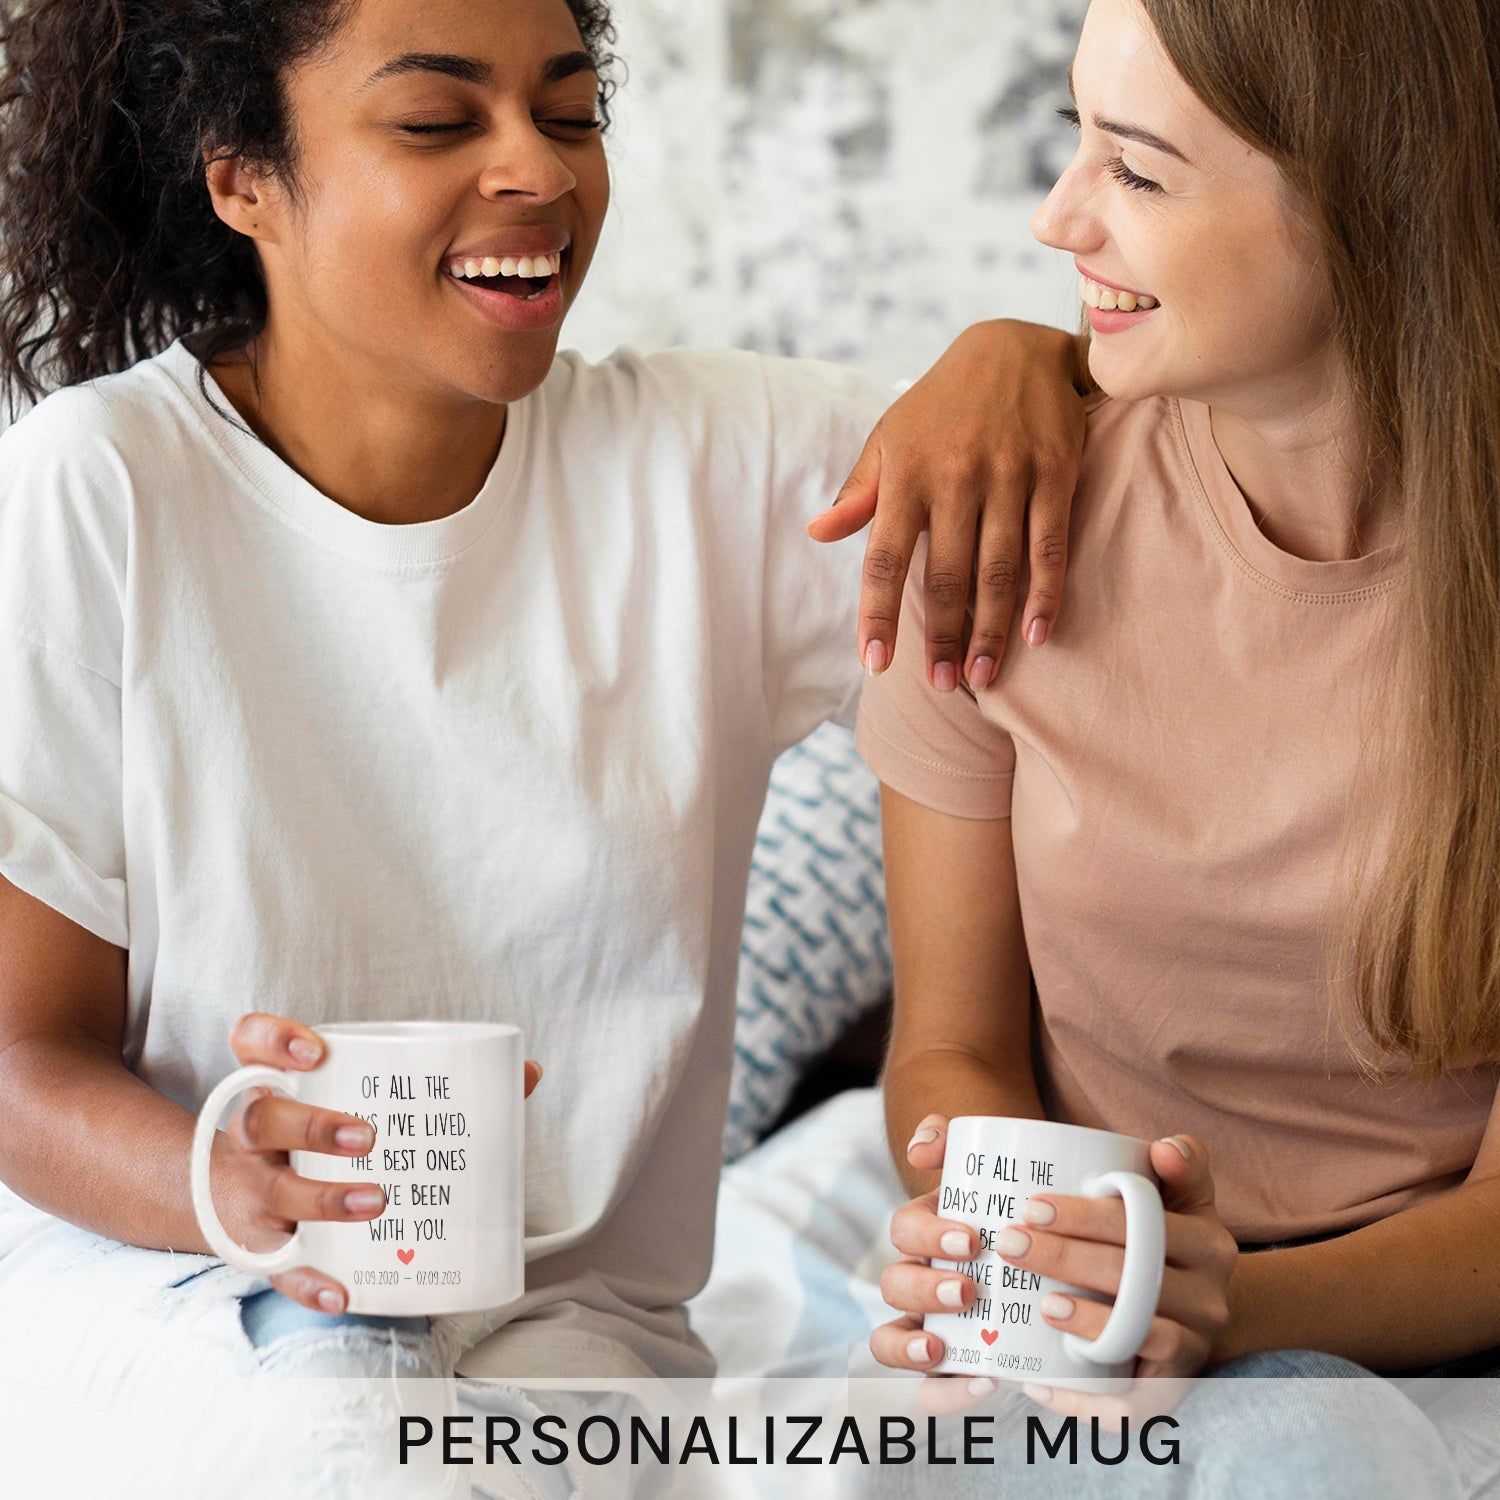 The Best Ones Have Been With You - Personalized Anniversary, Valentine's Day gift for Couple - Custom Mug - MyMindfulGifts